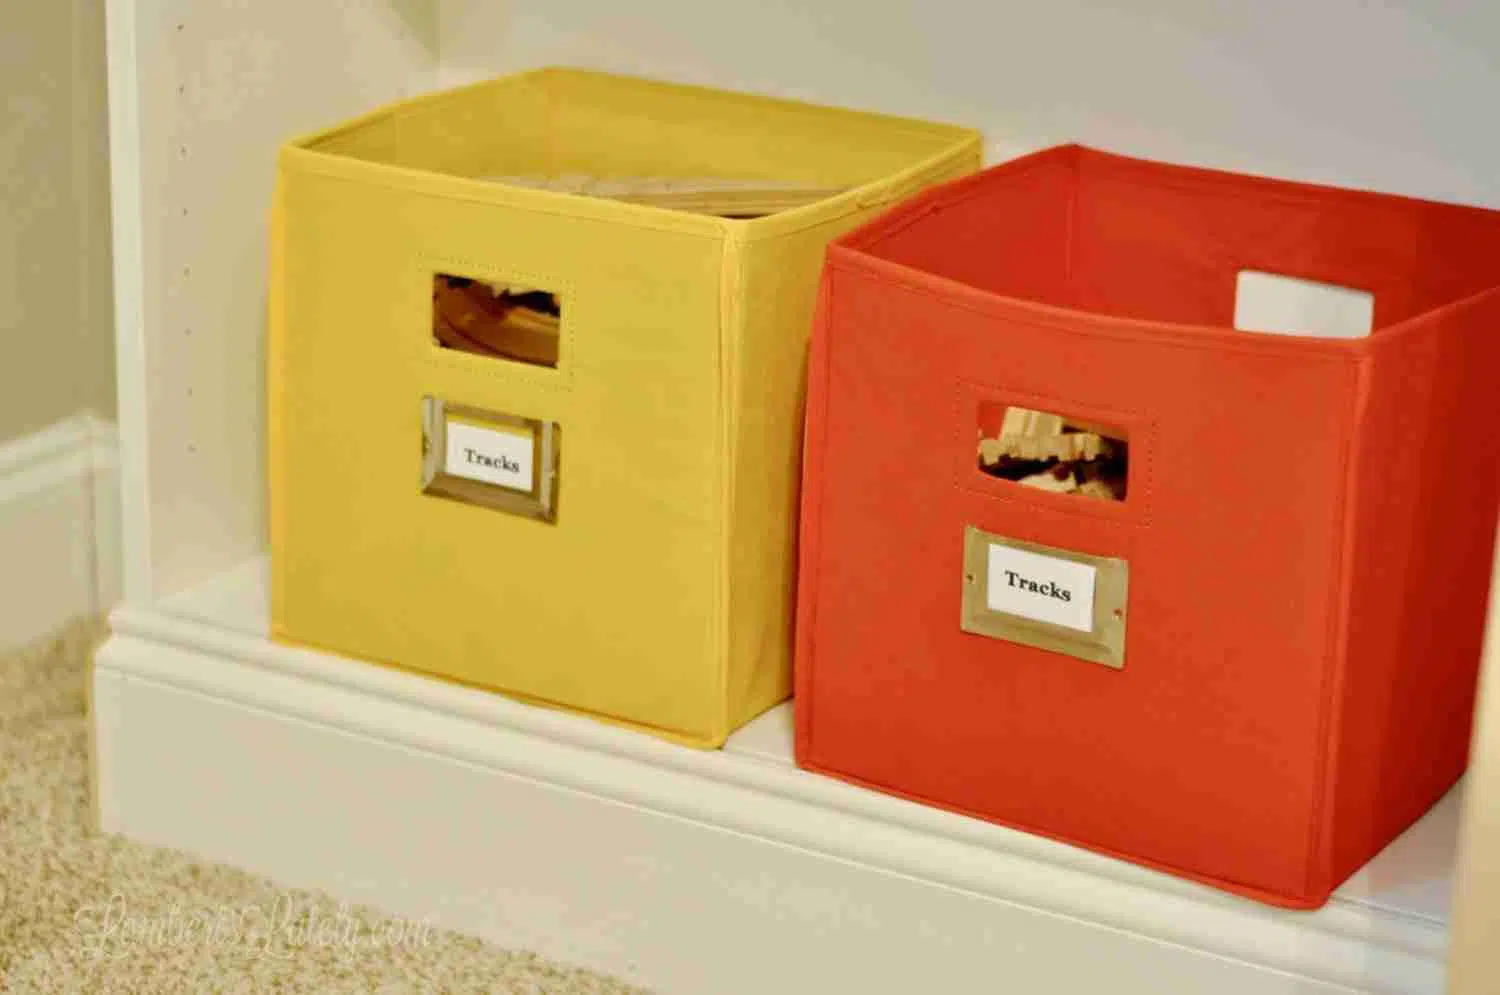 yellow and red fabric bins on a white shelf.